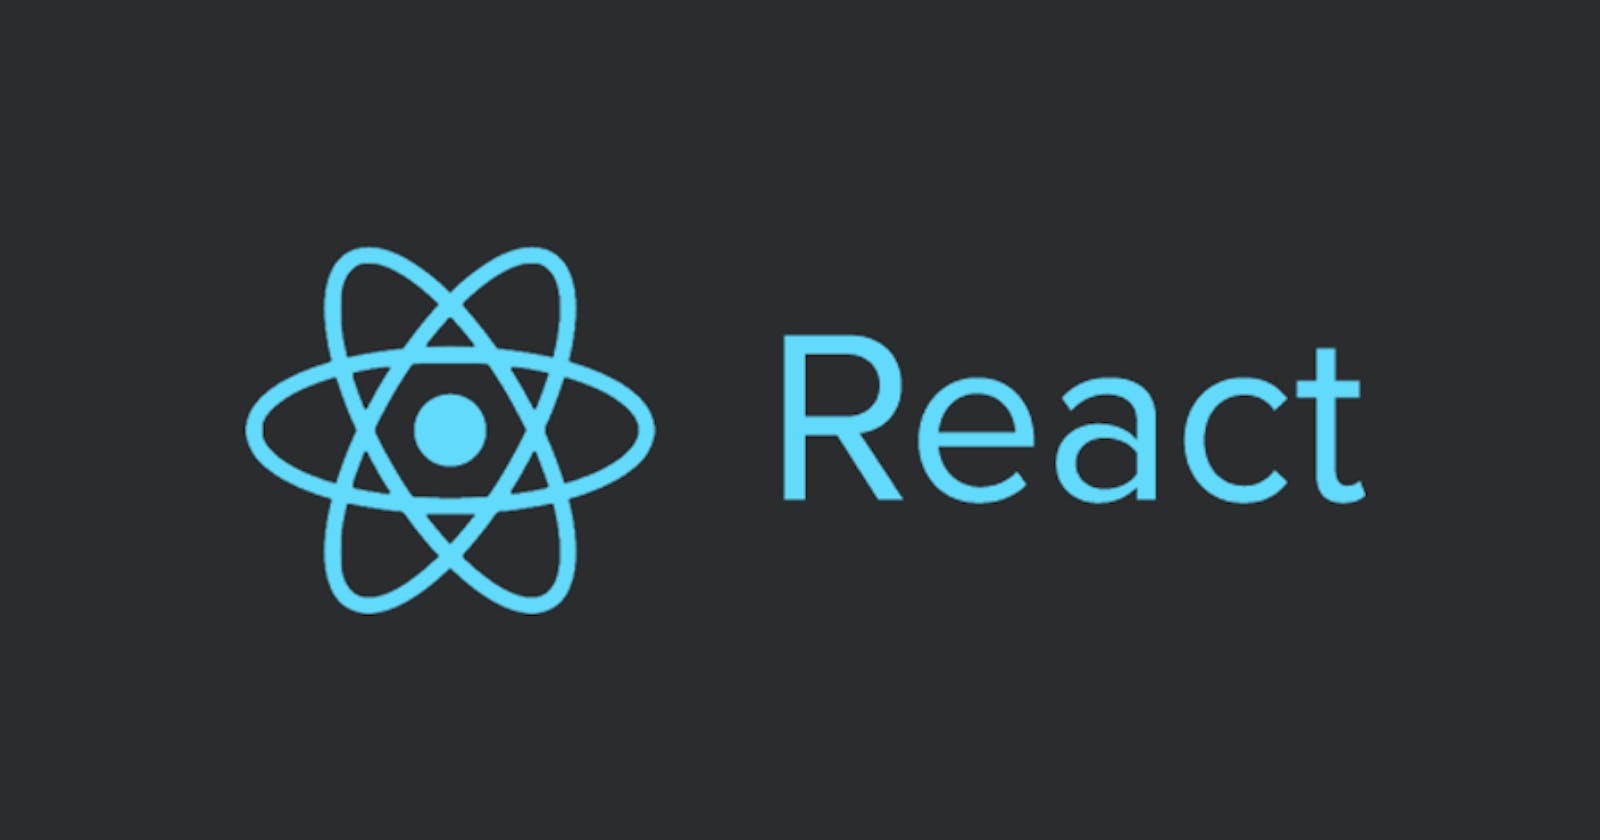 Use functional state updates for incrementing state variables in React